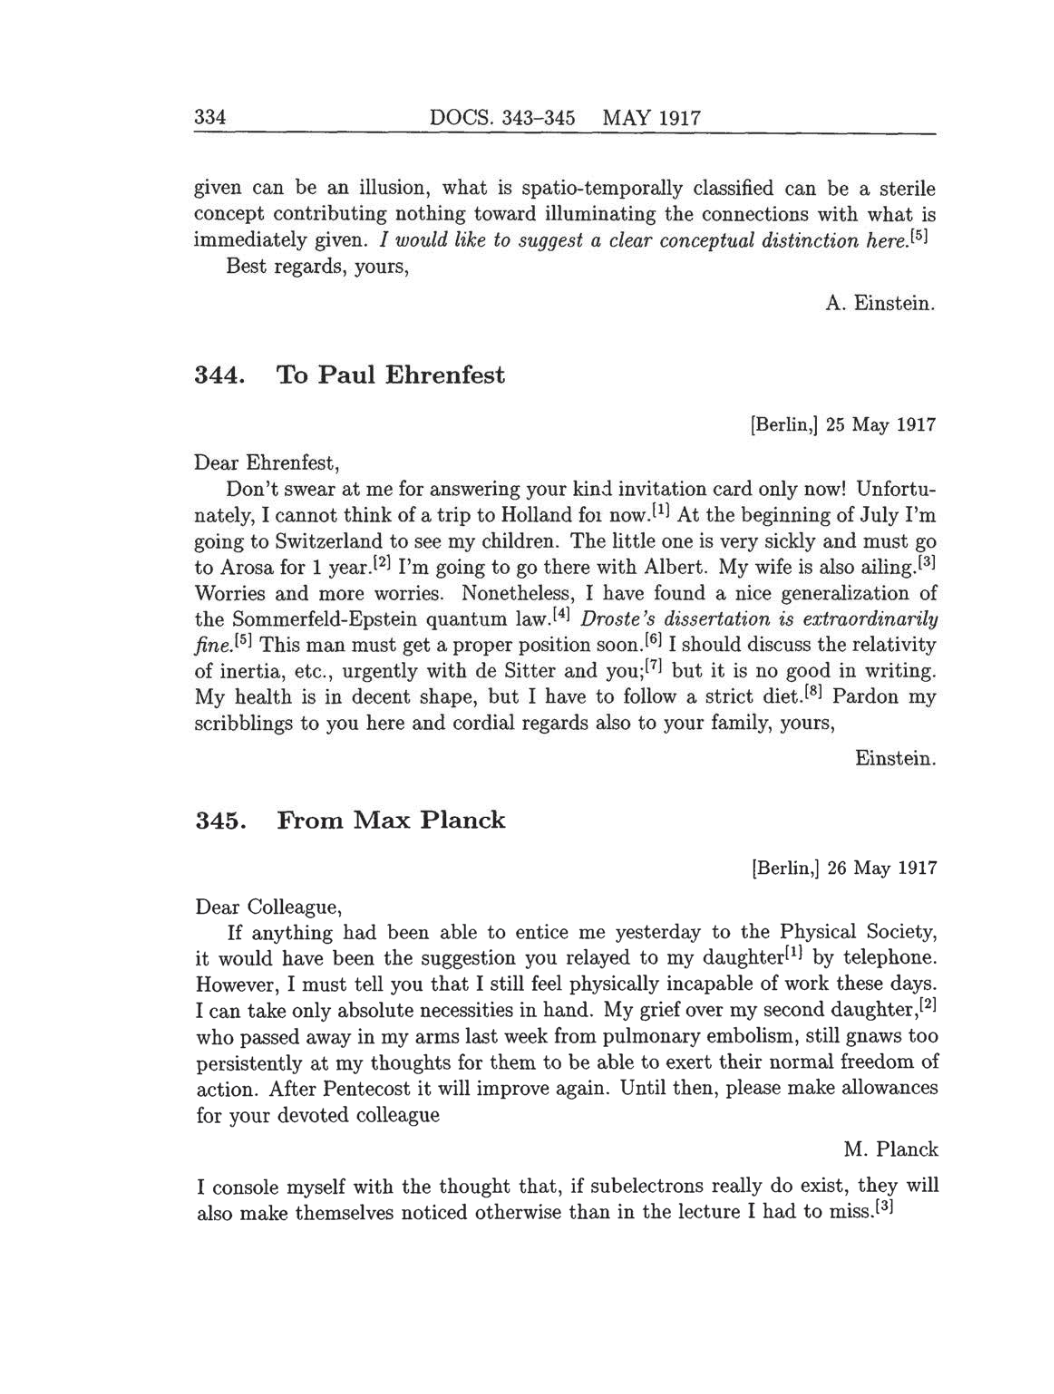 Volume 8: The Berlin Years: Correspondence, 1914-1918 (English translation supplement) page 334